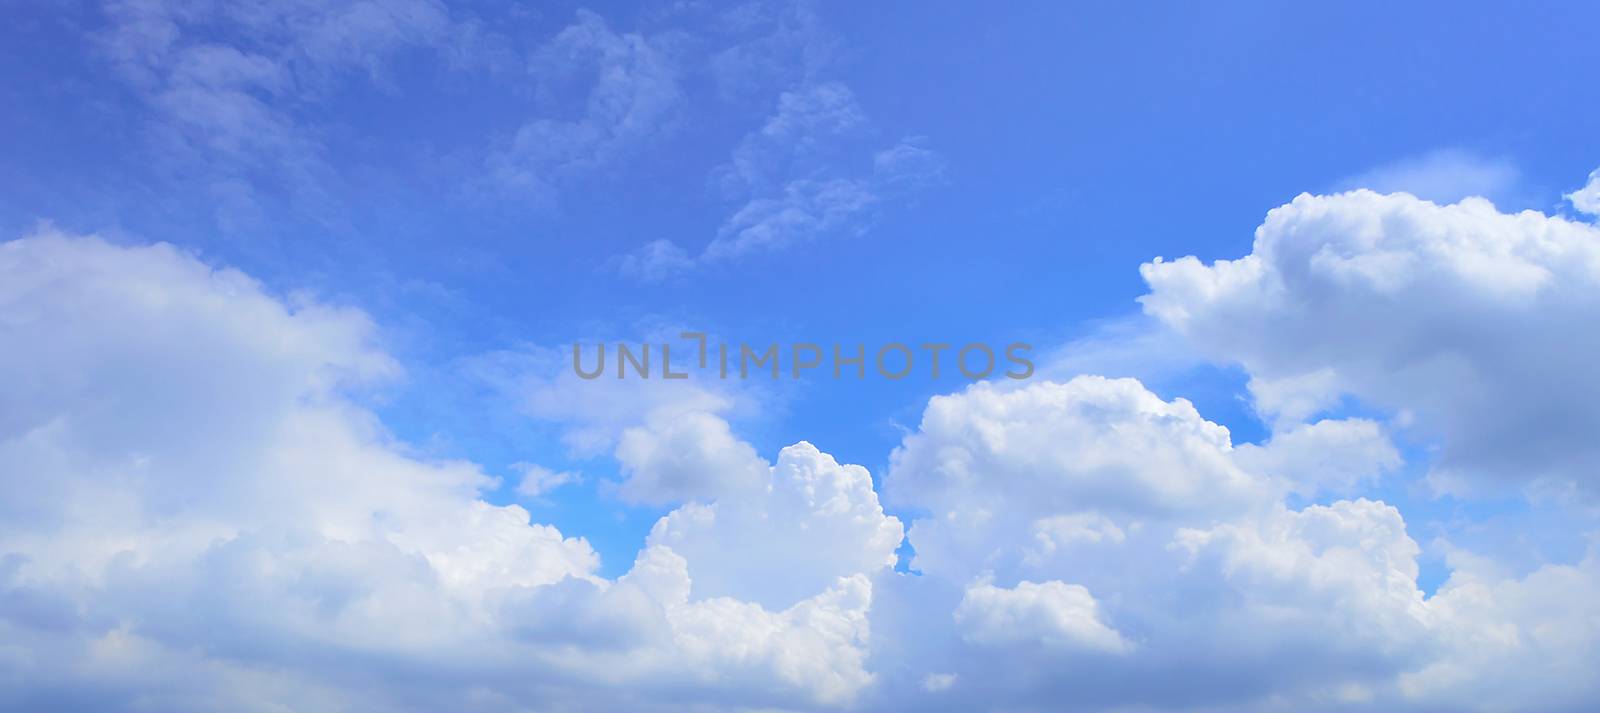 The sky in blue with white cloud.